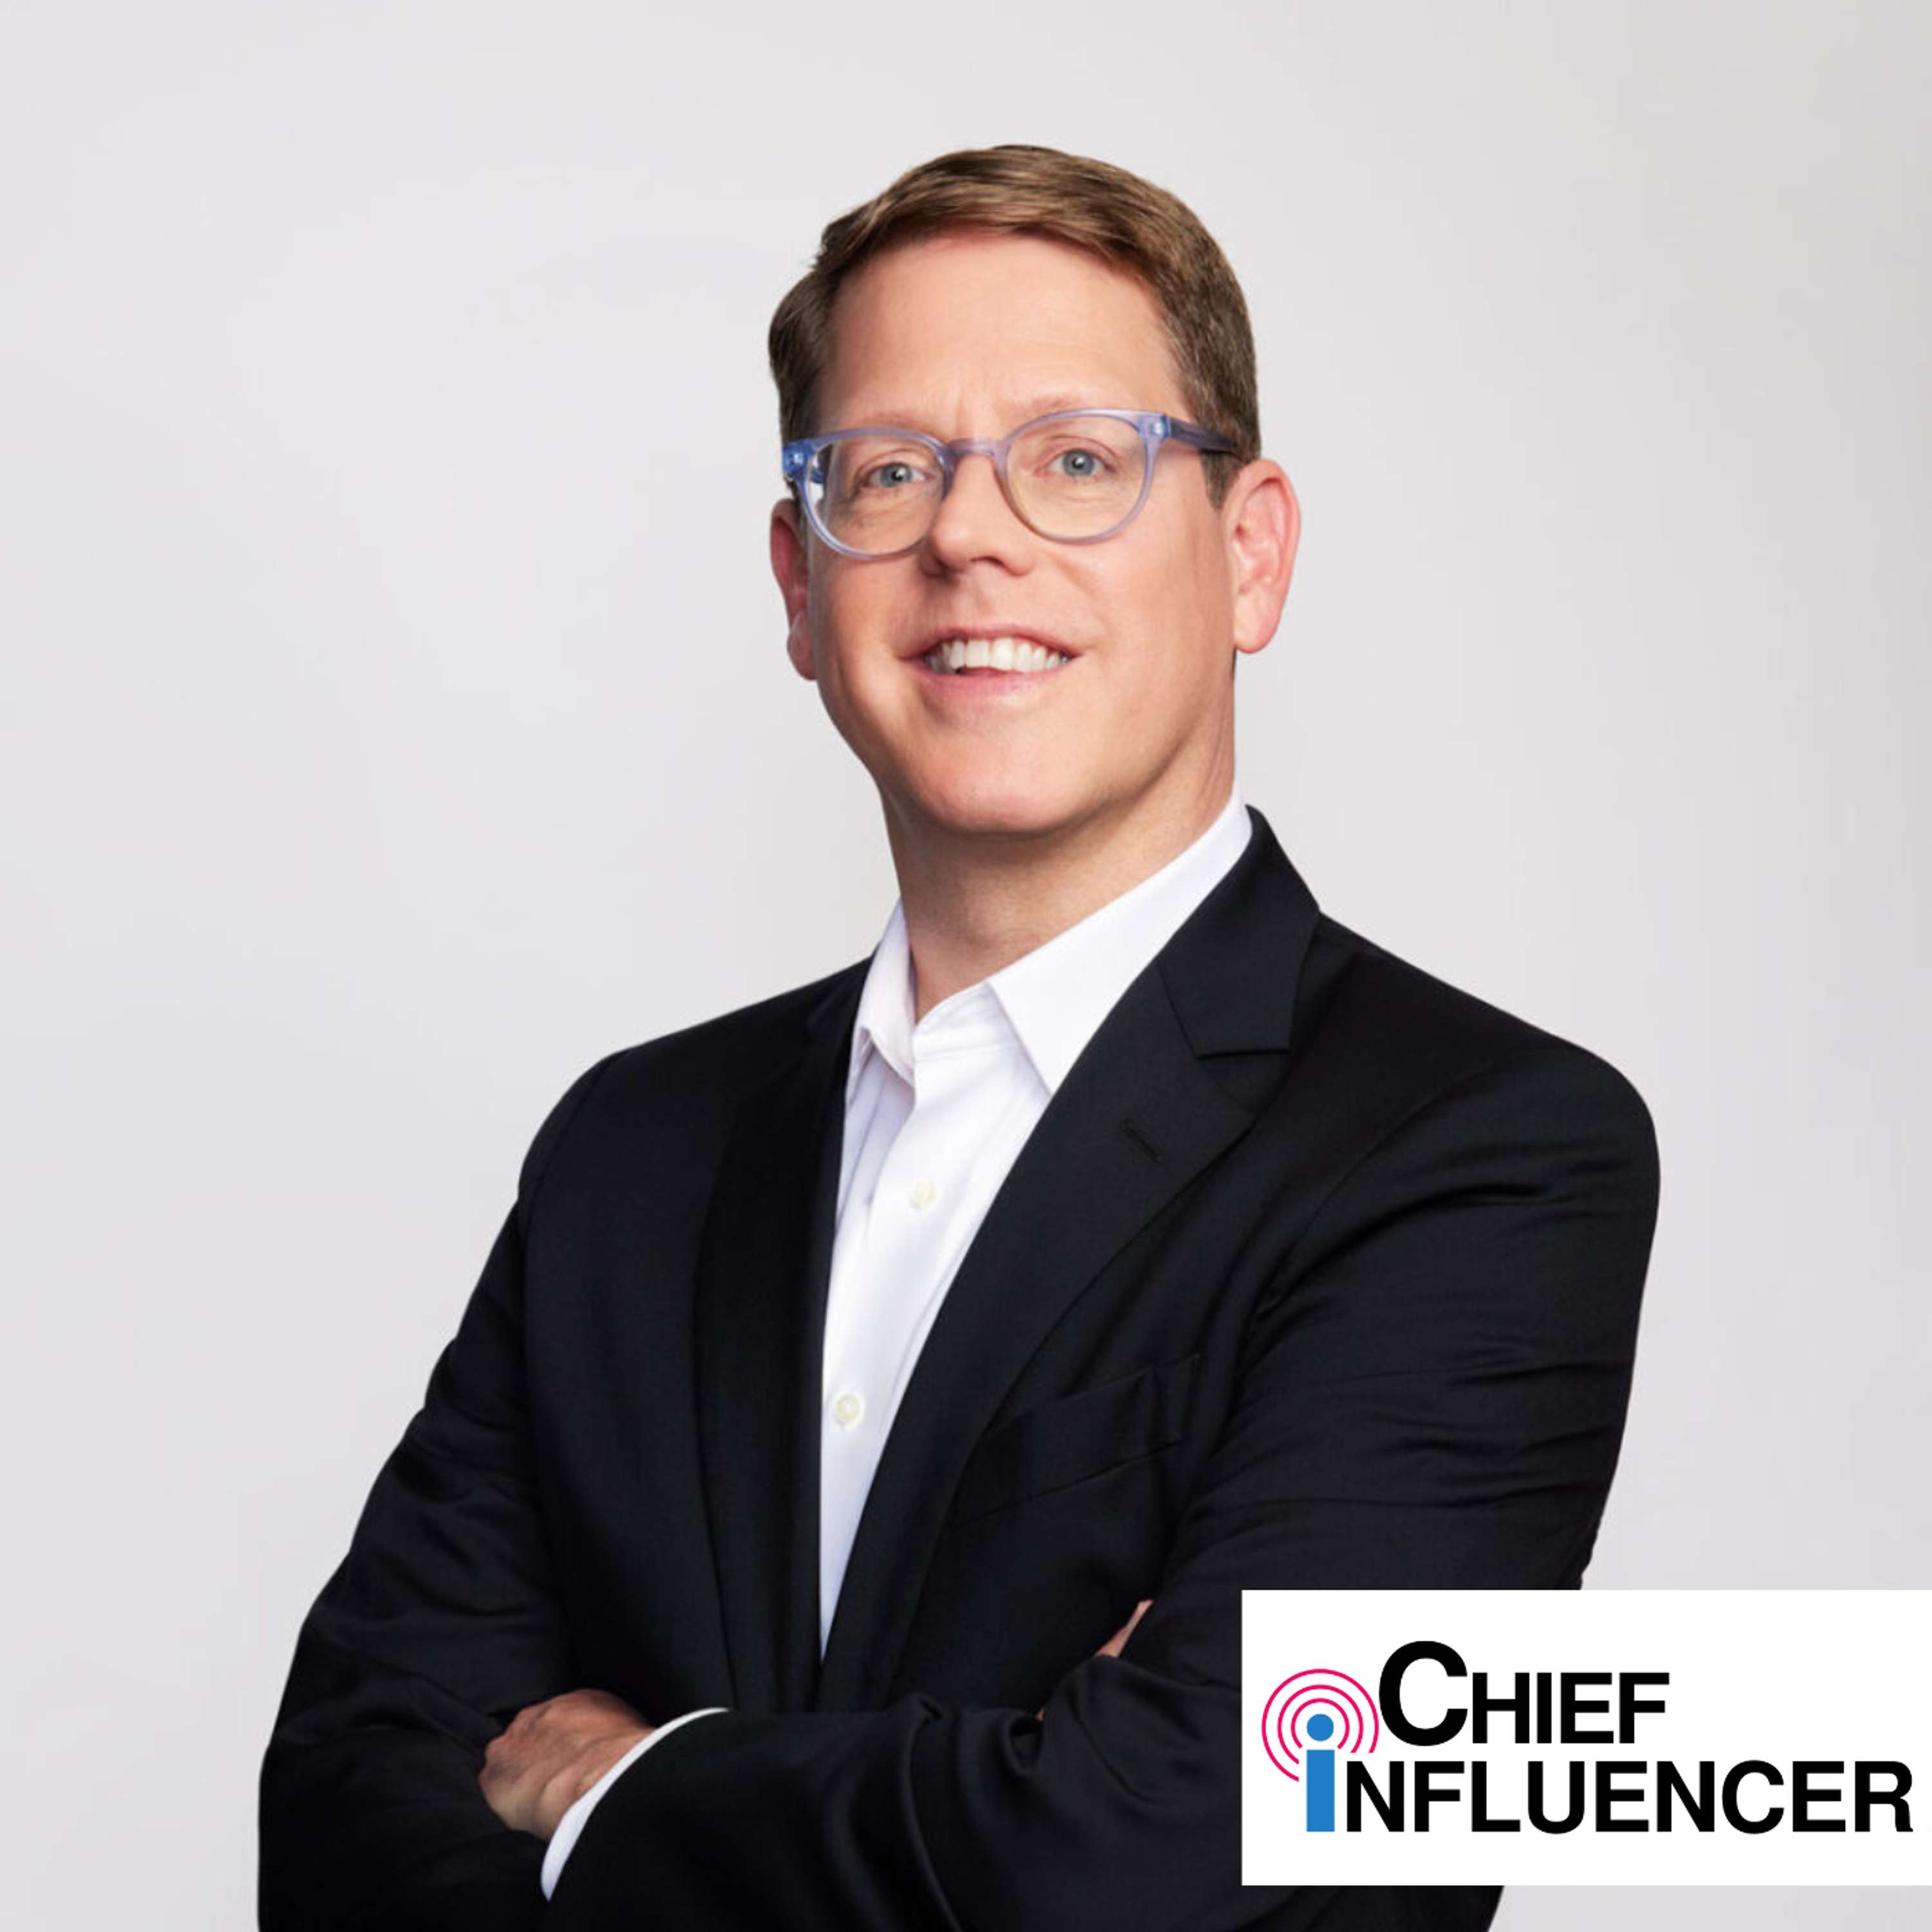 Bill Smith on Uniting Leadership, Passion & Policy - Chief Influencer - Episode # 048